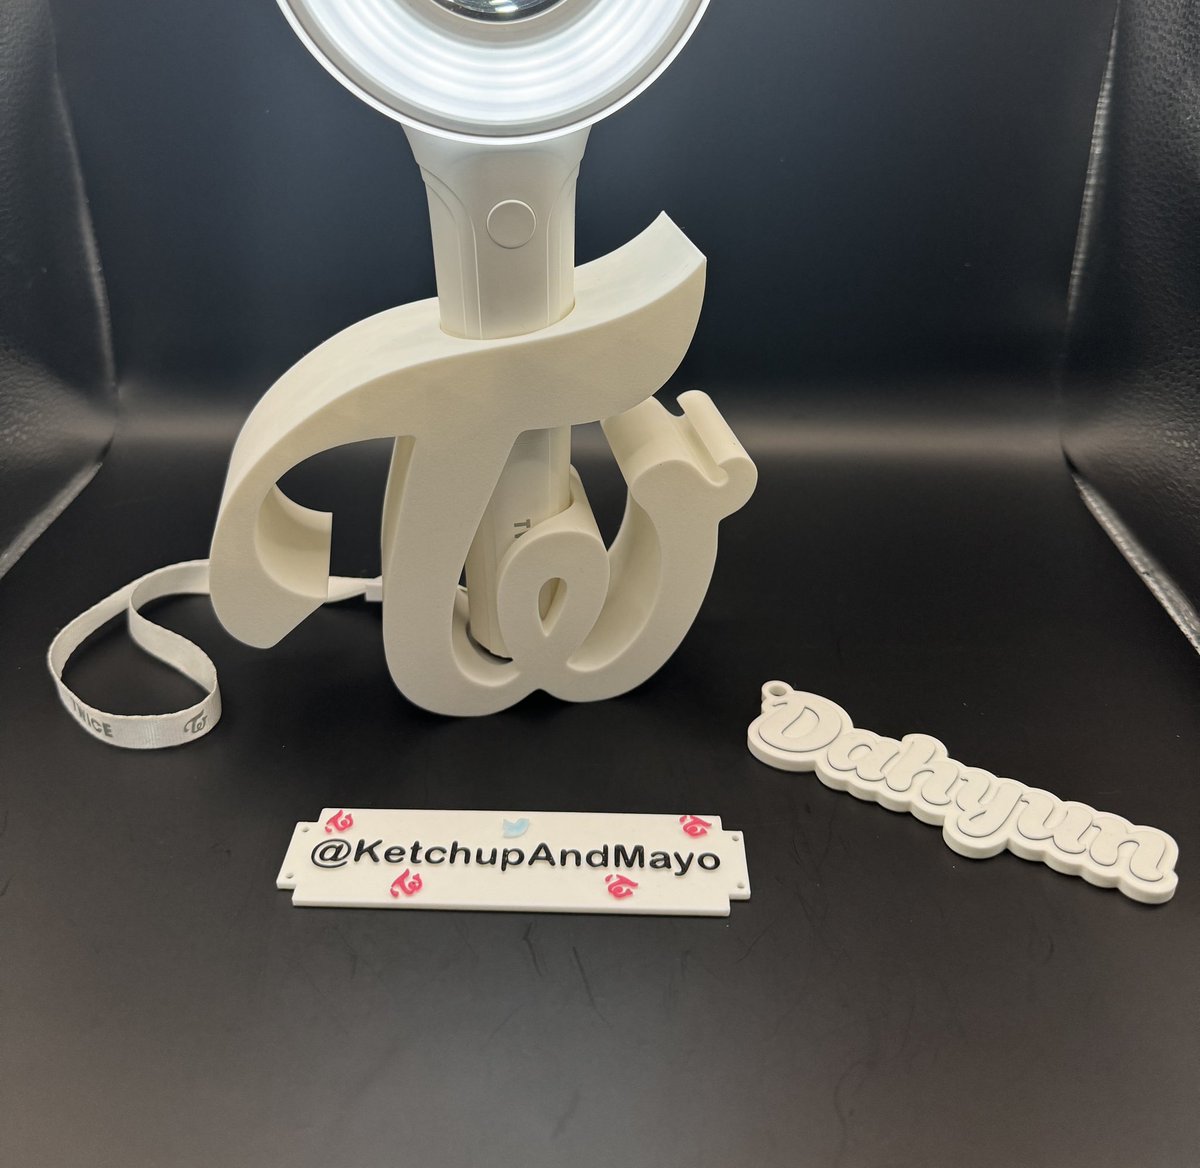 🌎Worldwide GA time! 1 winner on May 19. A White Universal Candybong stand for Dahyun’s 🎂 month. Ships to you free anywhere in the world! 🚨RULES🚨: REPOST♻️, FOLLOW🚶‍♂️, LIKE🤍! If this gets more than 200+ reposts I’ll do another GA this month!